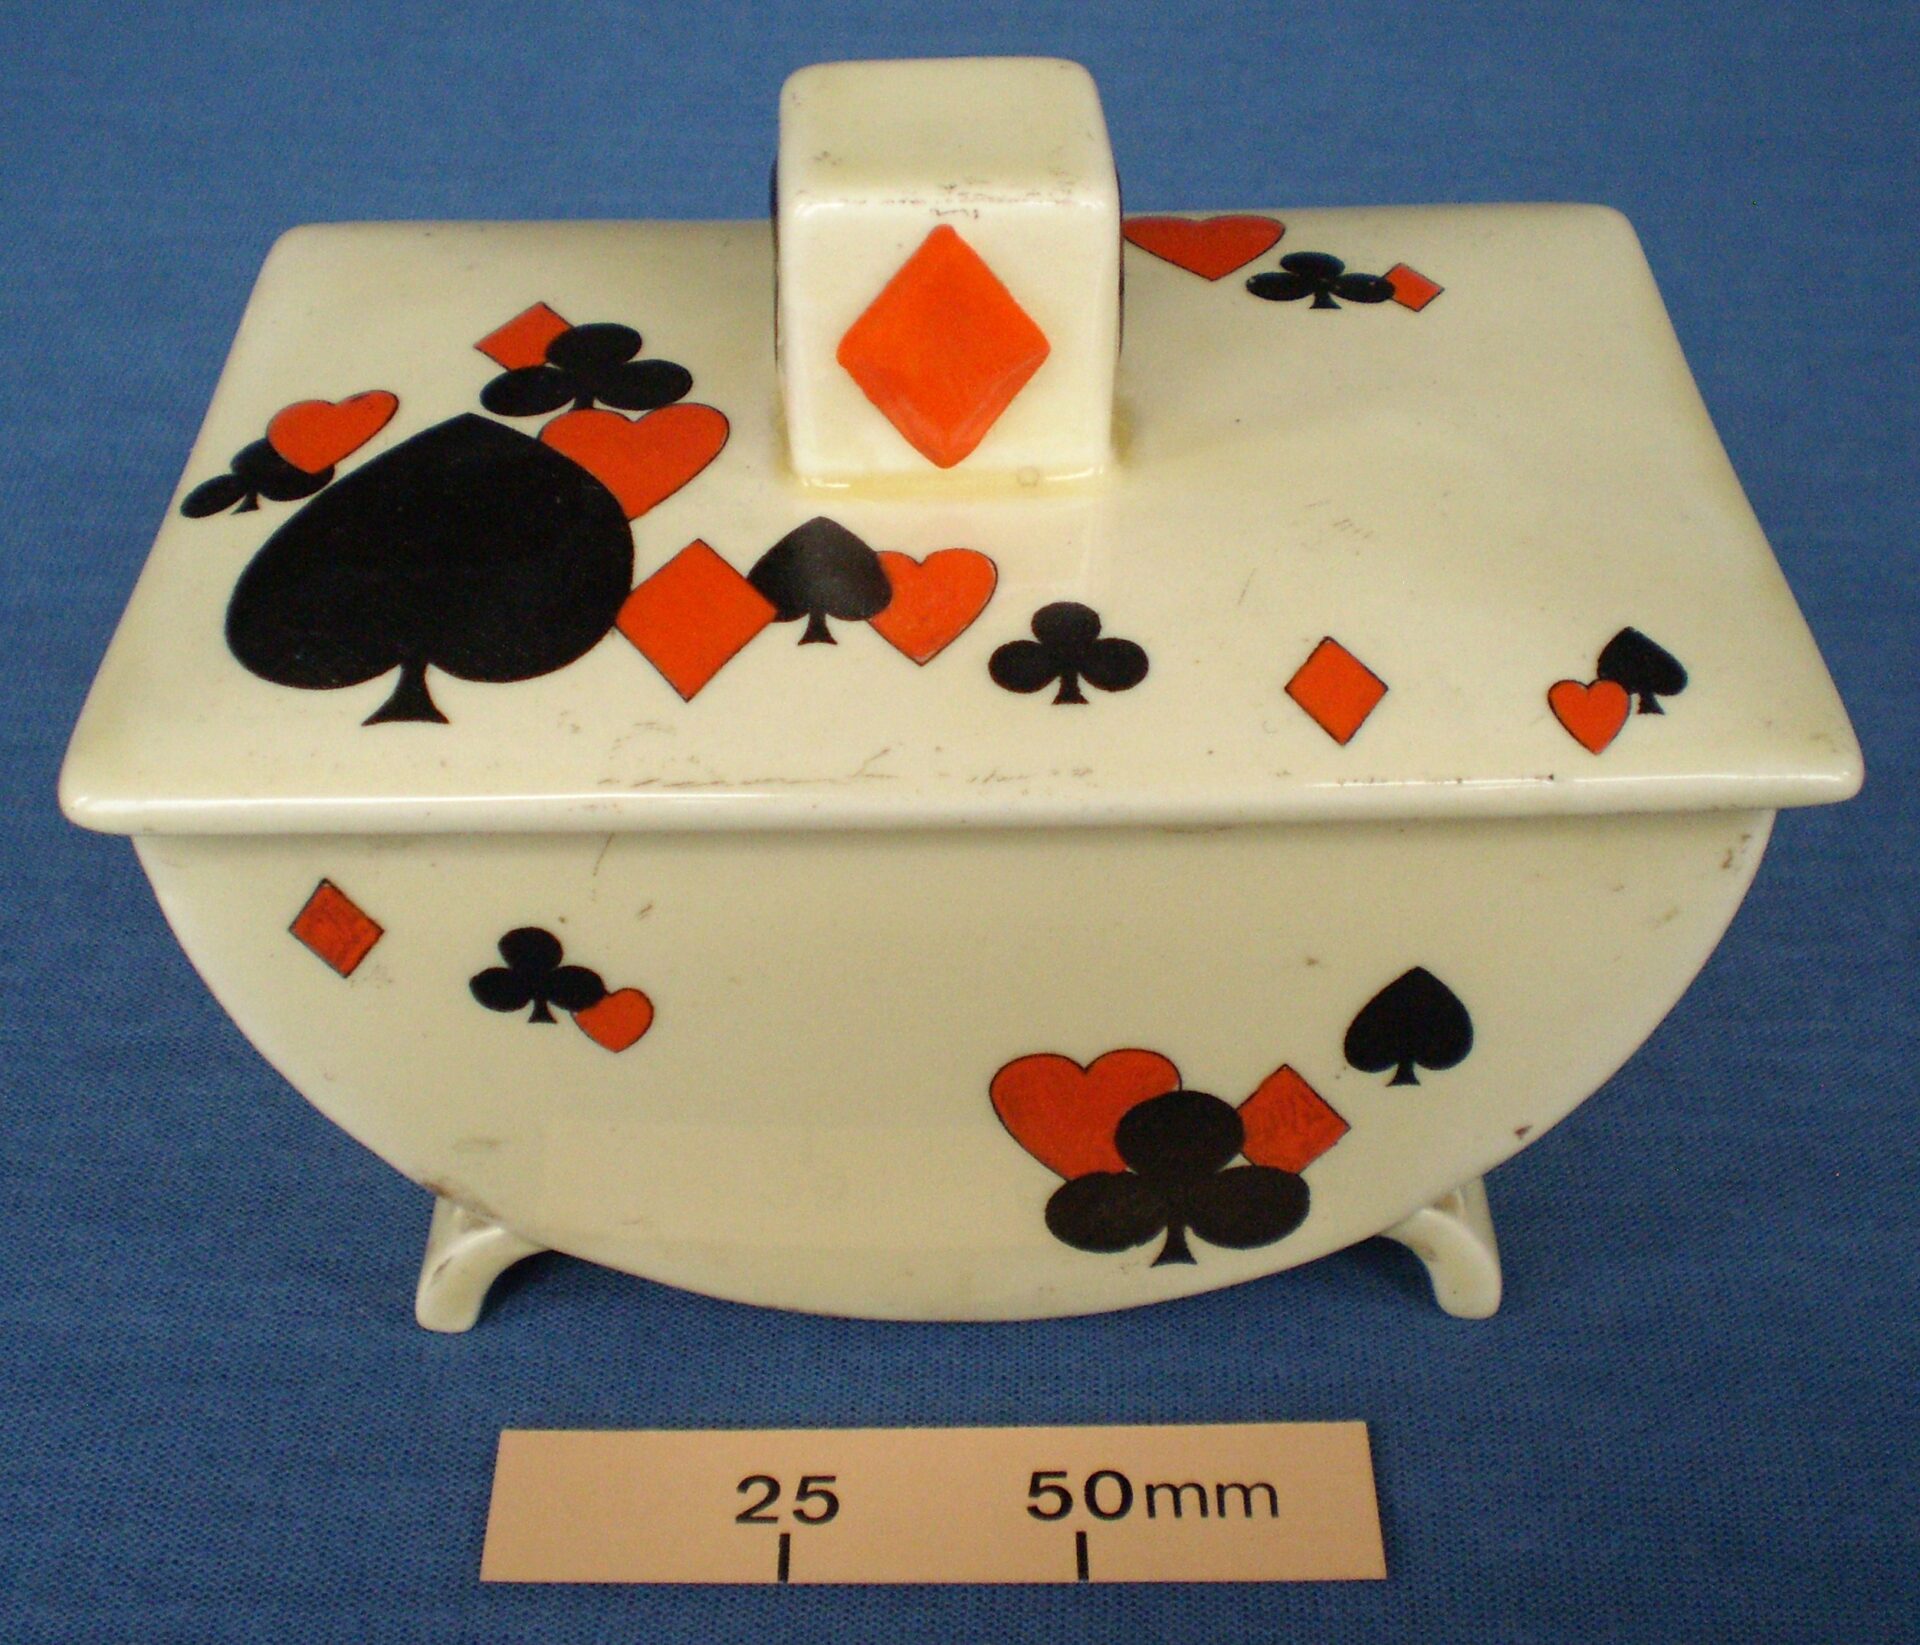 Royal Doulton covered dish decorated with Clubs, Hearts, Diamonds and Spade pips